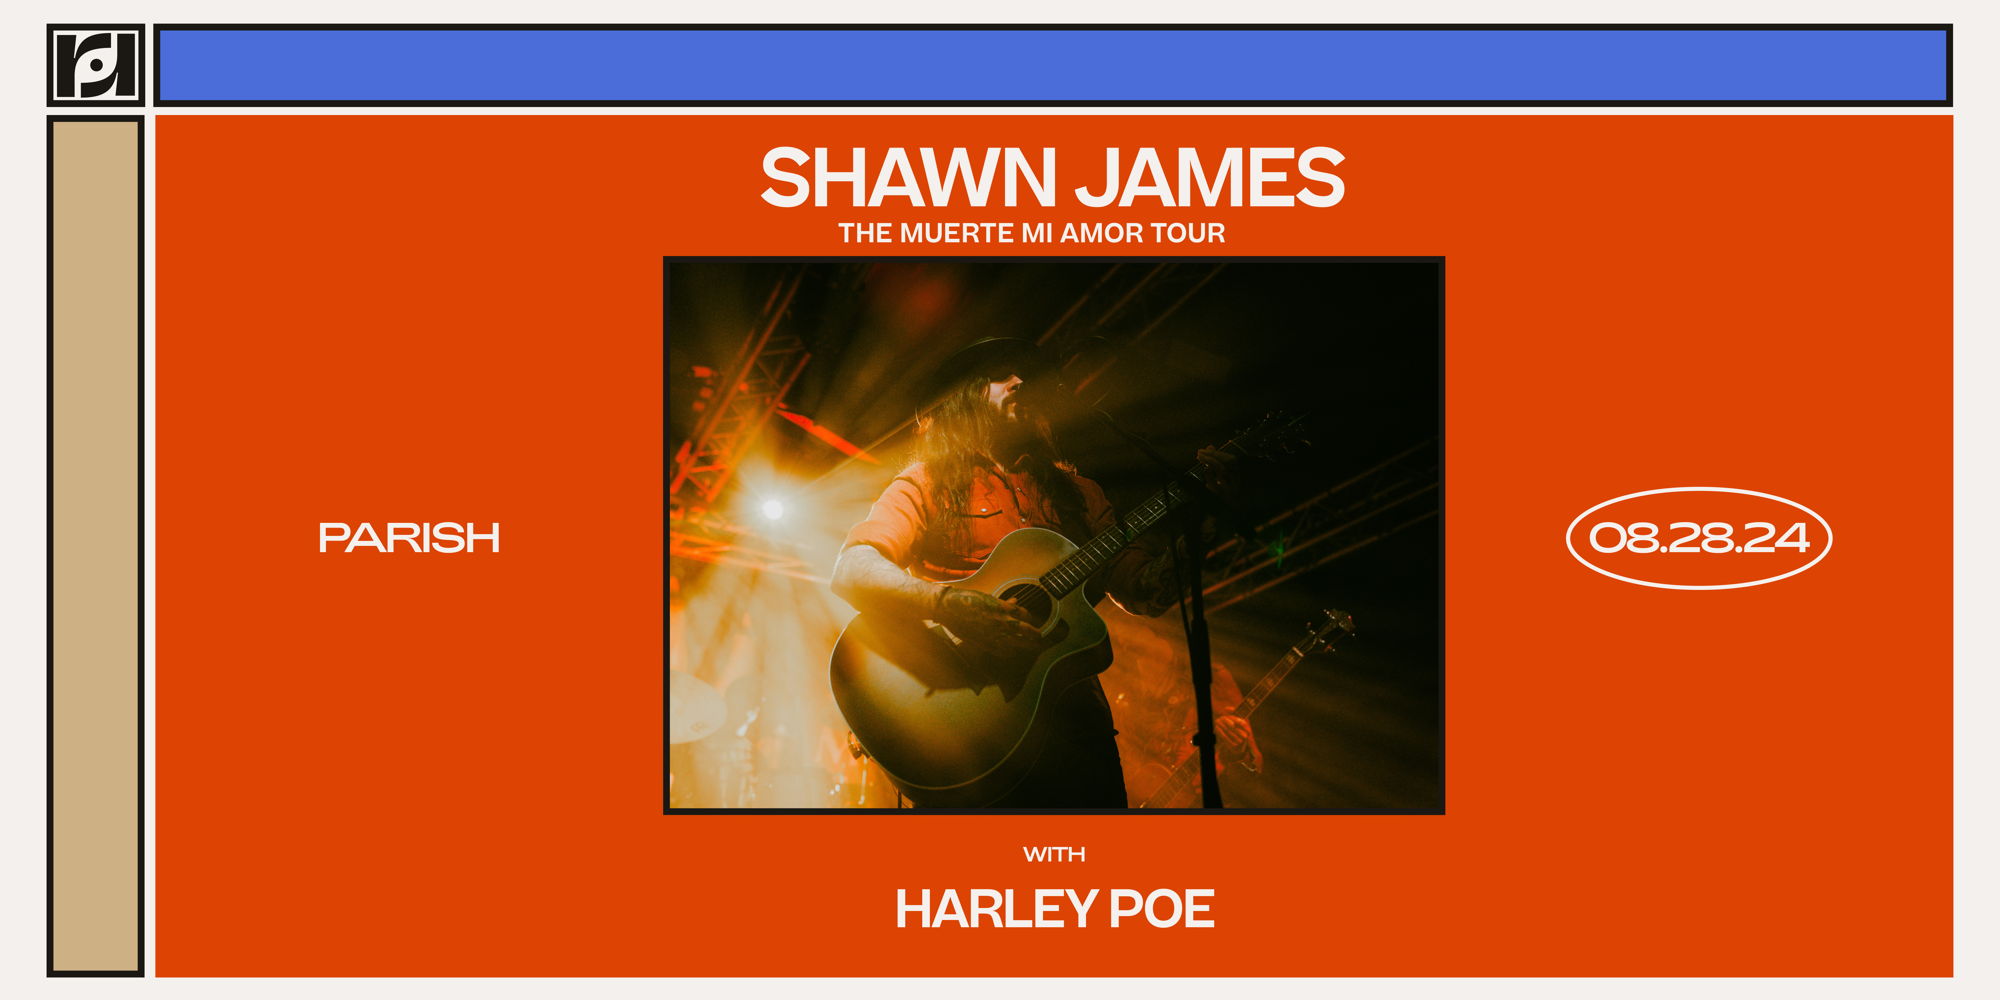 Resound Presents: Shawn James "The Muerte Mi Amor Tour" w/ Harley Poe 8/28 at Parish Door / Show Time: 7:30PM / 8:30PM promotional image